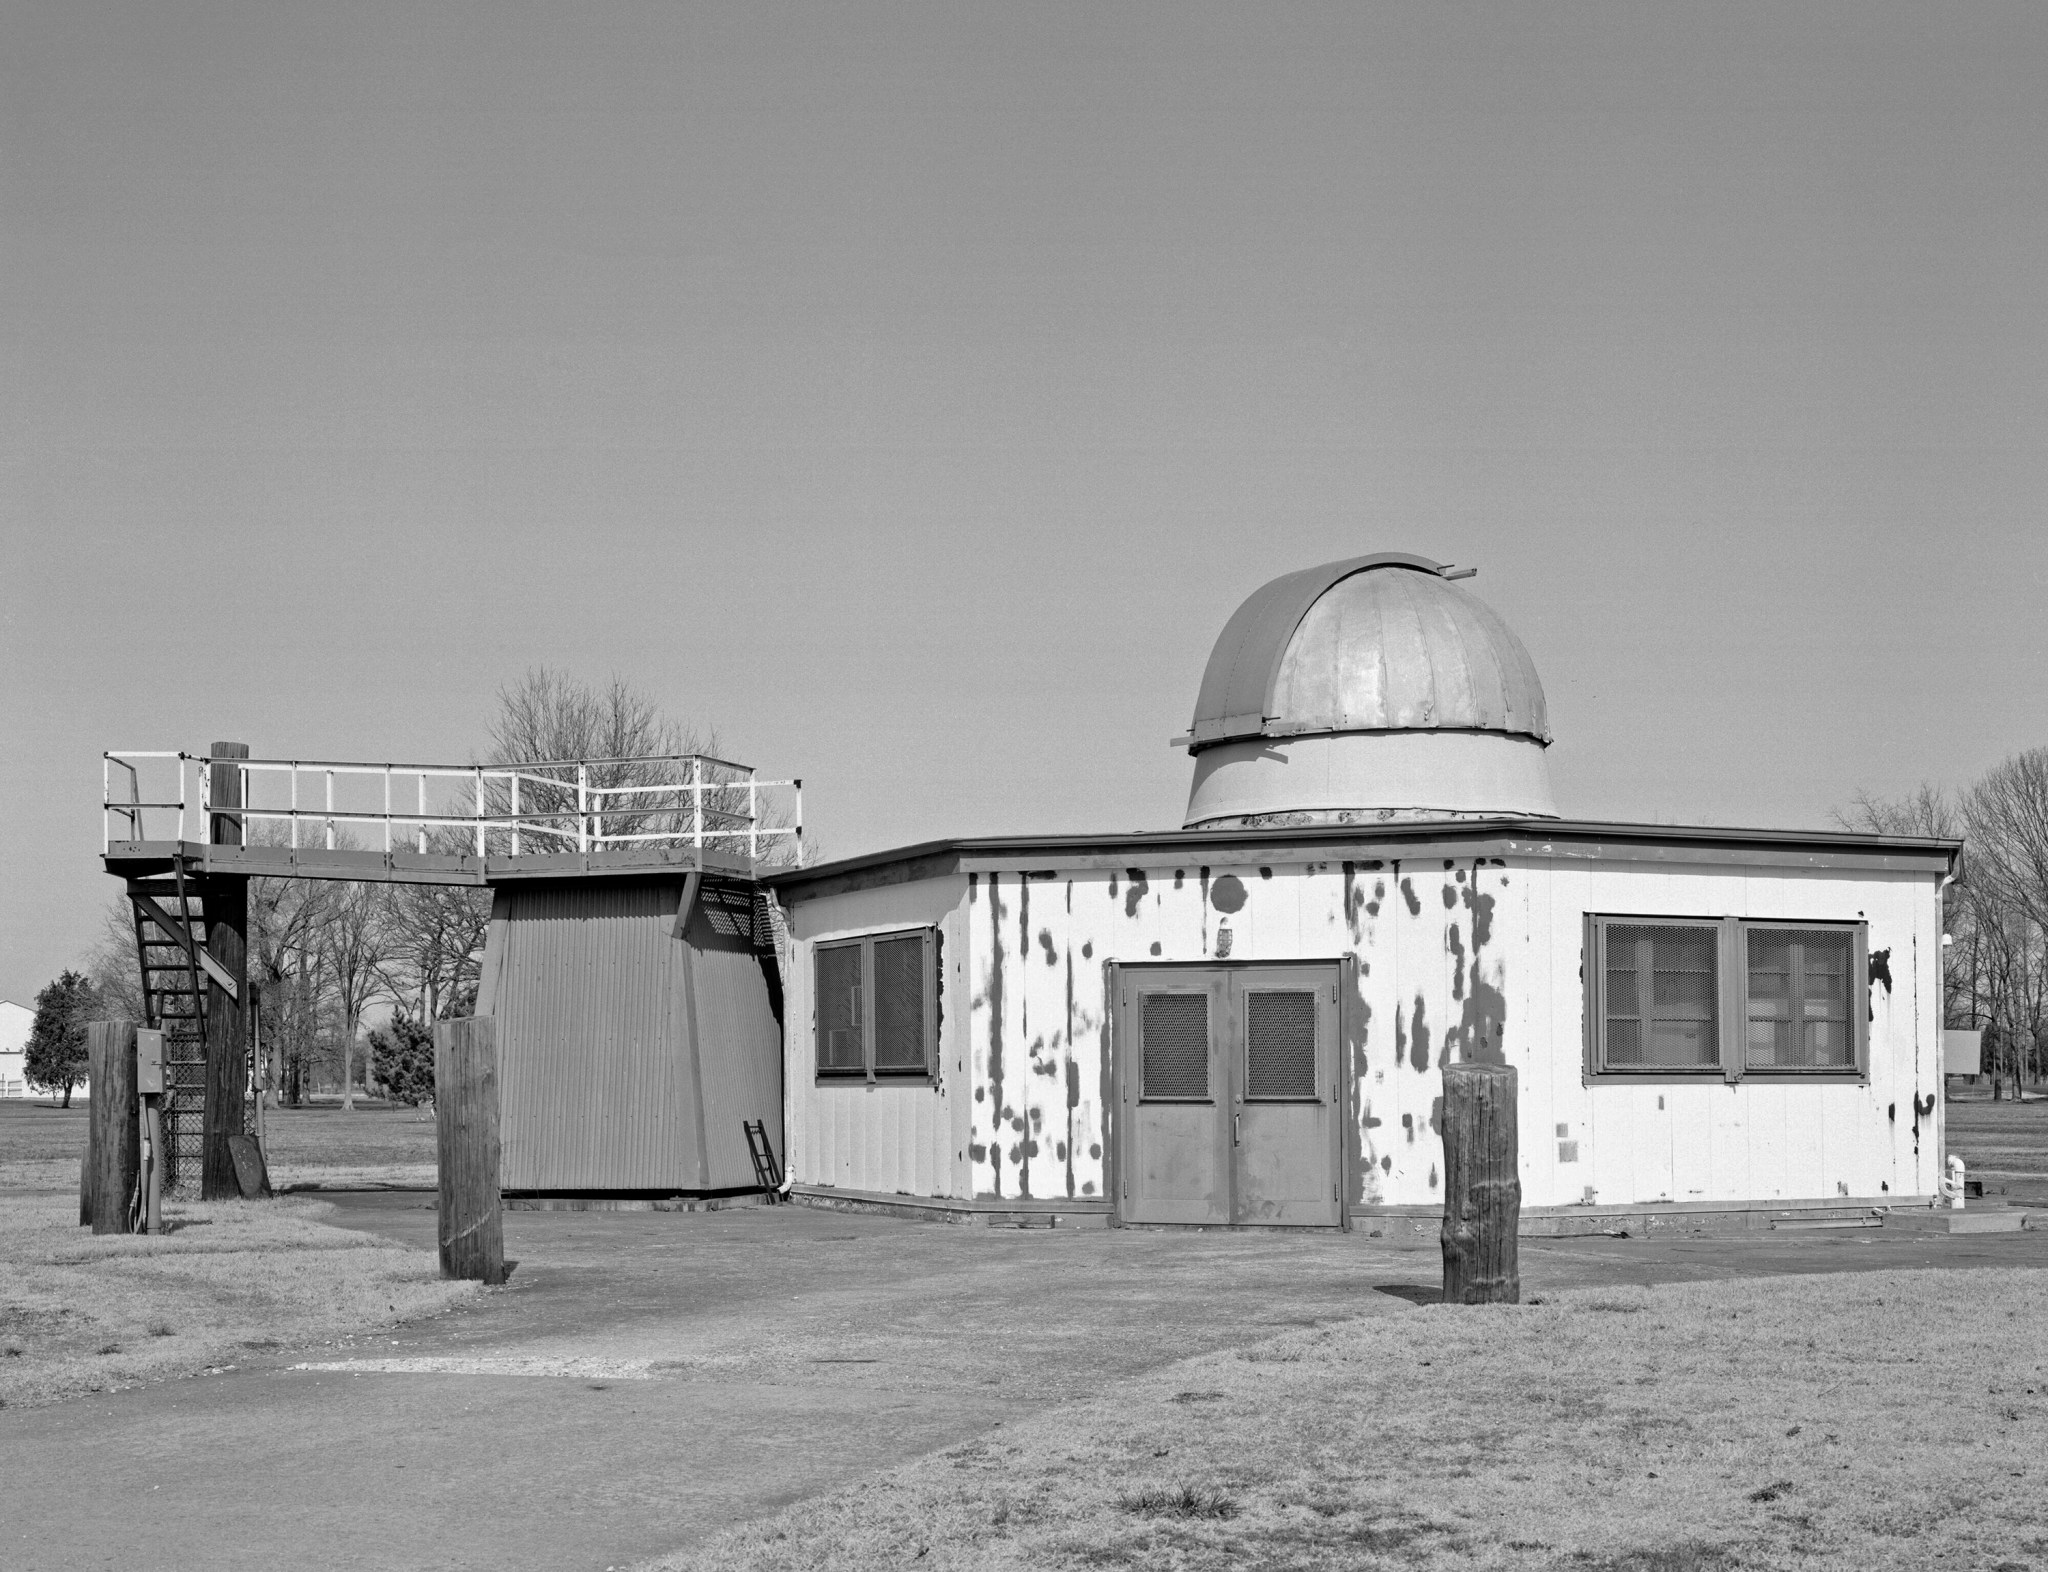 Building 1231A functioning in its new capacity as the observatory in 1984.